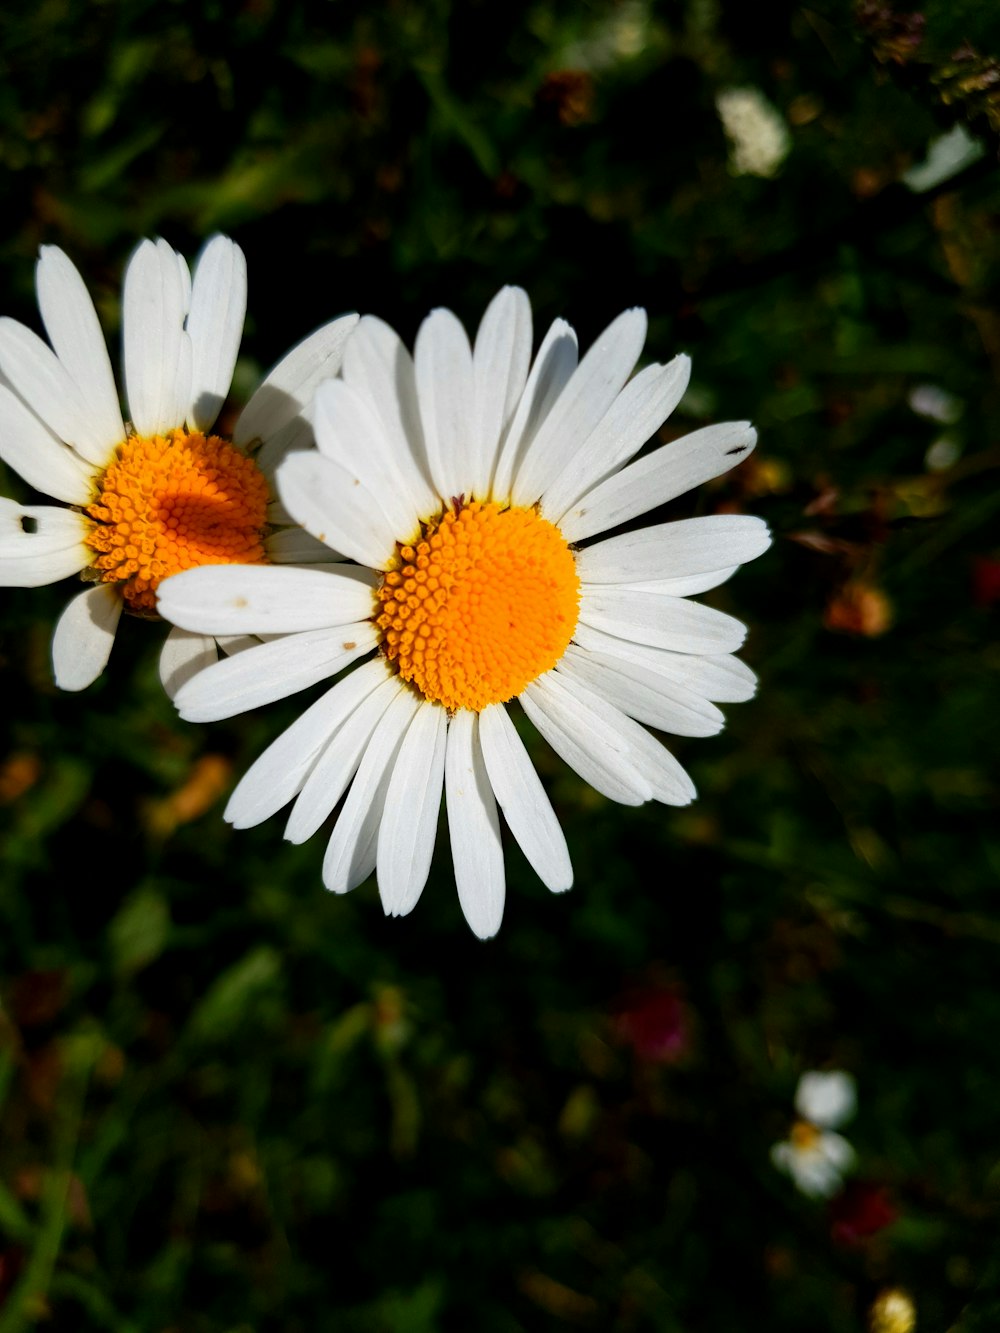 two white flowers with yellow centers in a field